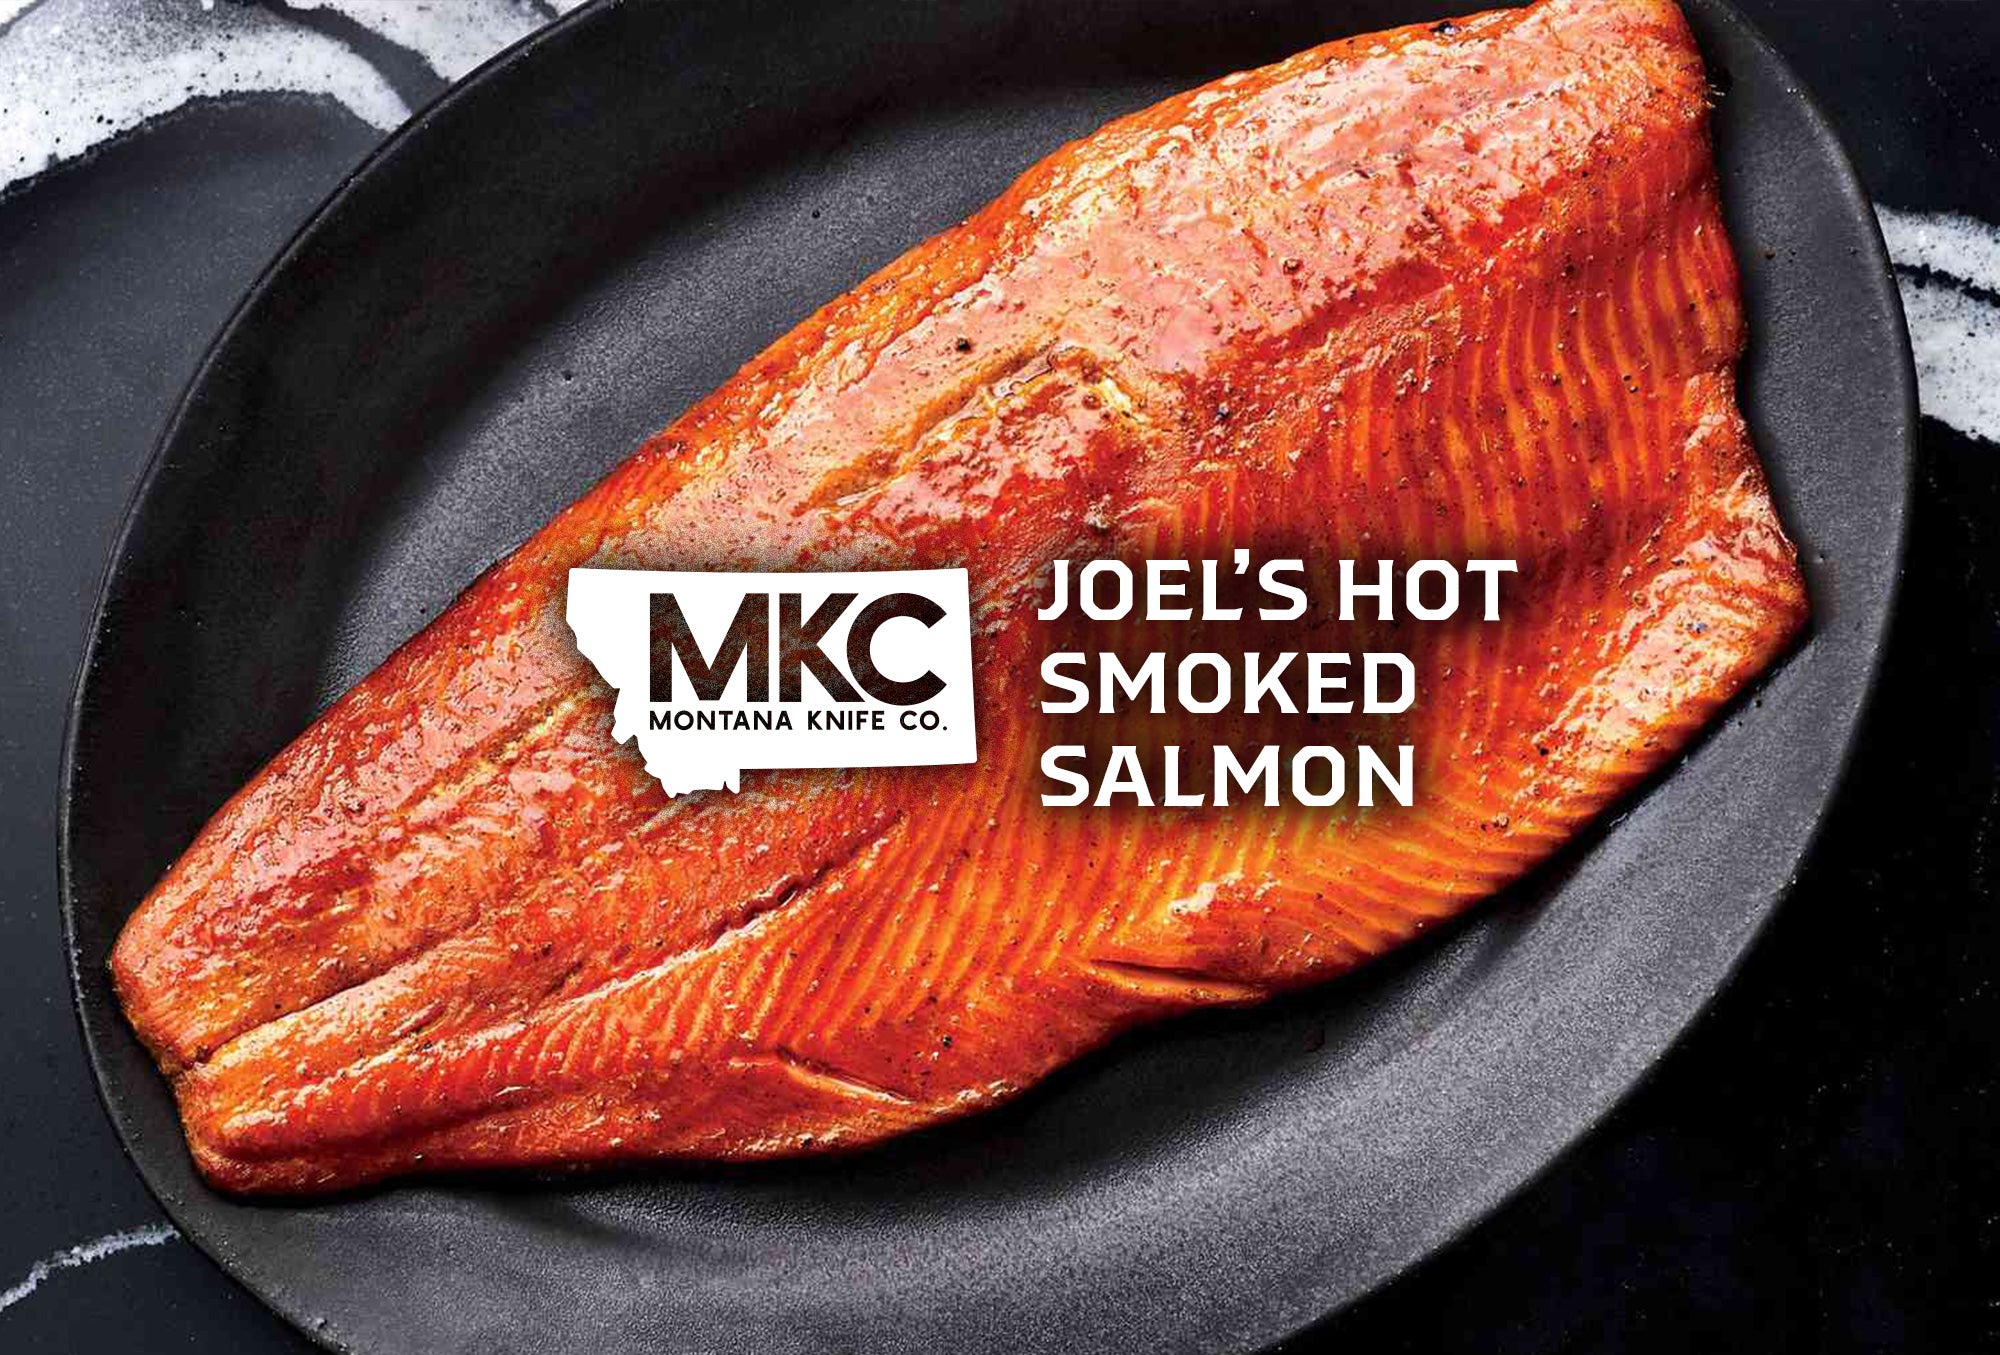 A large, hot smoked salmon filet rests in a clean cast iron pan.